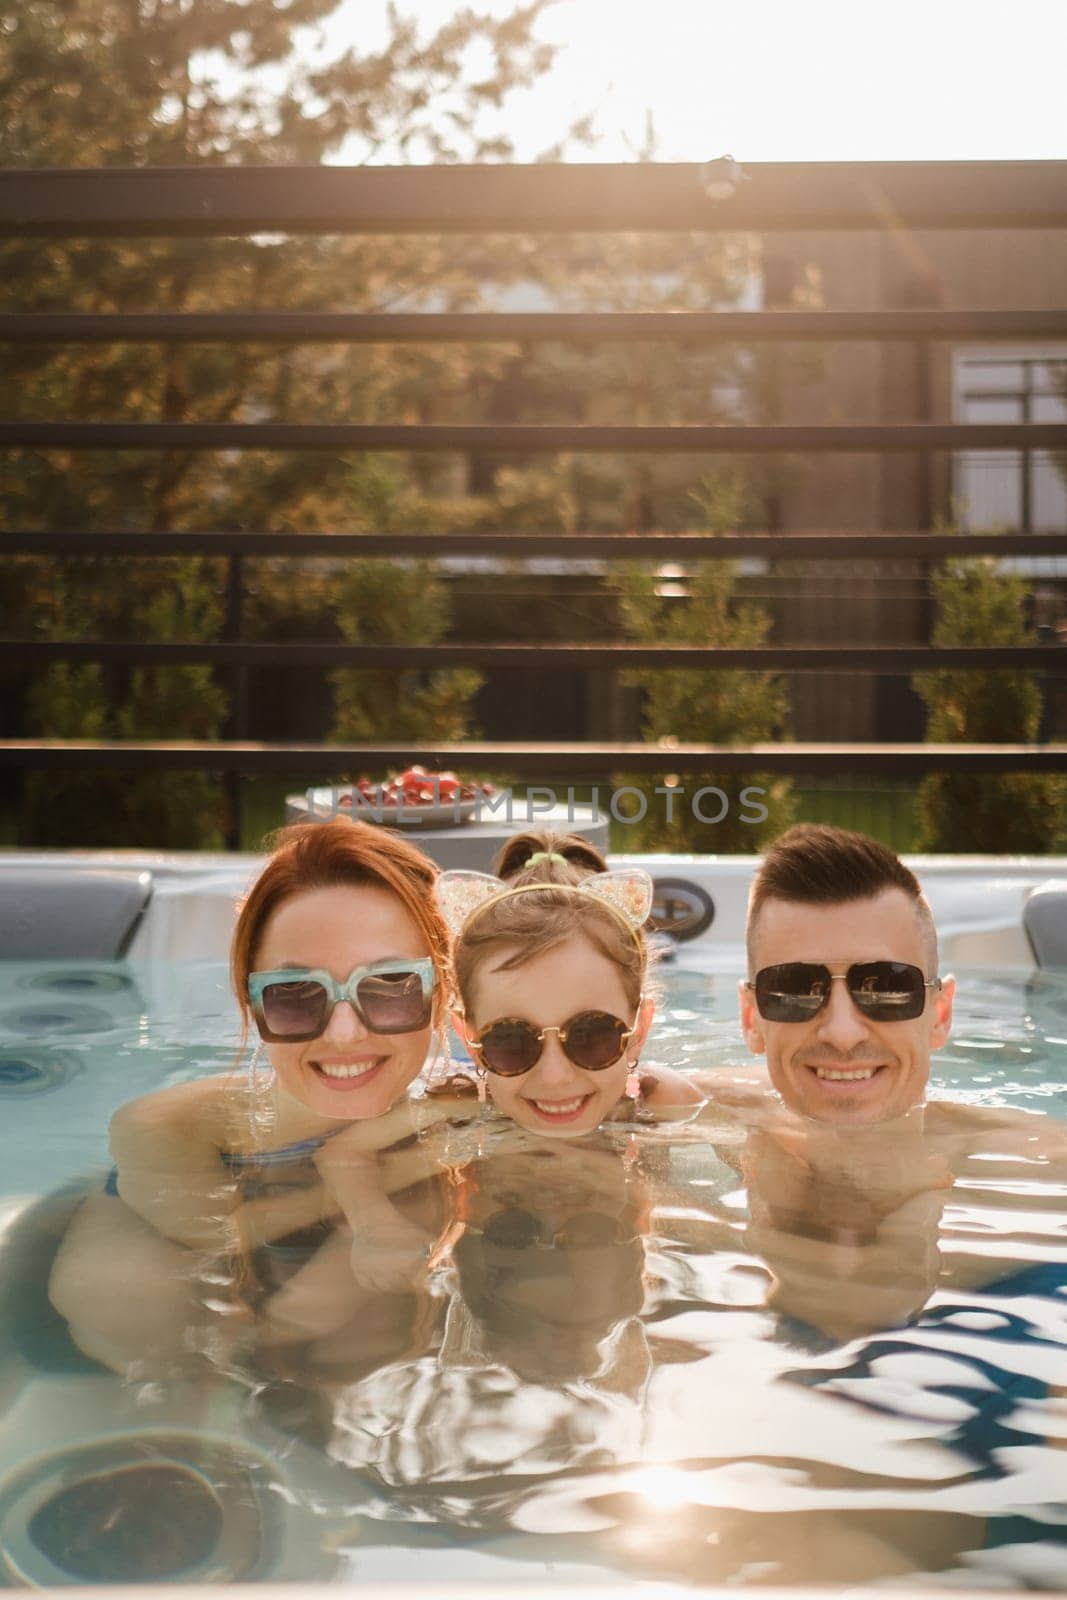 In summer, the family rests in the outdoor hot tub by Lobachad